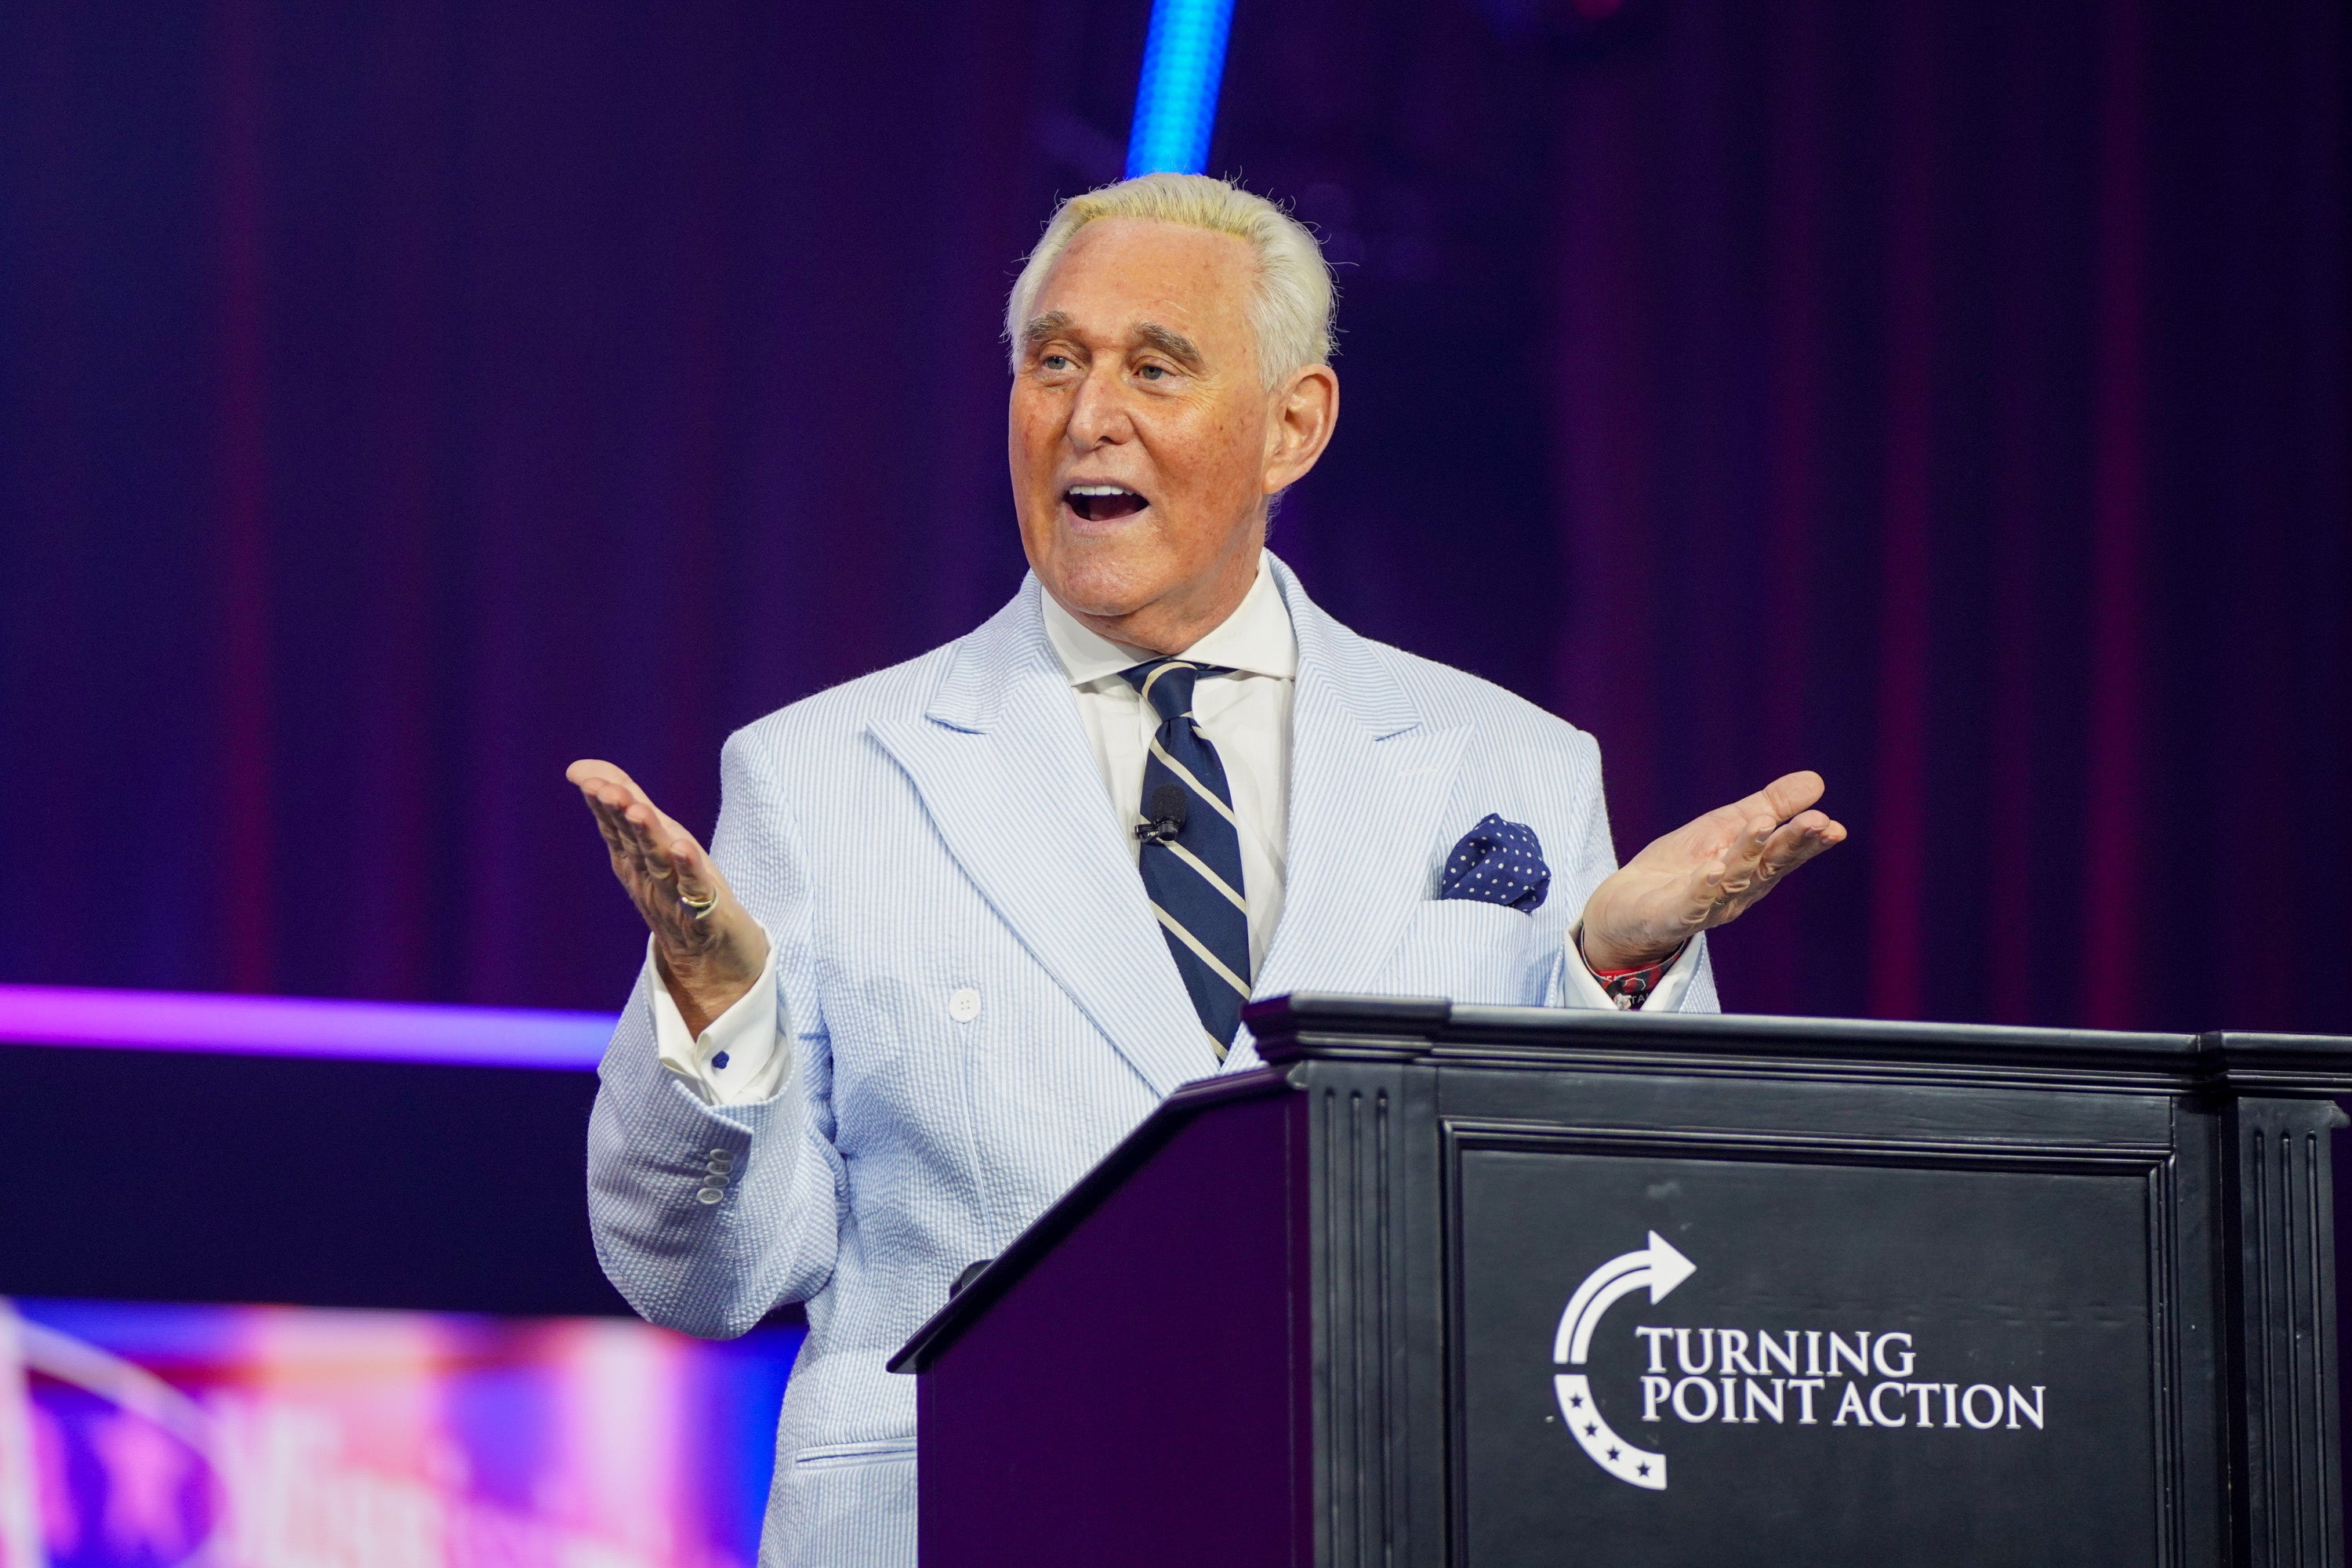 Political consultant Roger Stone speaks at The People’s Convention, a gathering of prominent conservatives organized by the political group Turning Point Action, in Detroit. A new secert recording reveals his plan to help Trump challenge the 2024 election.